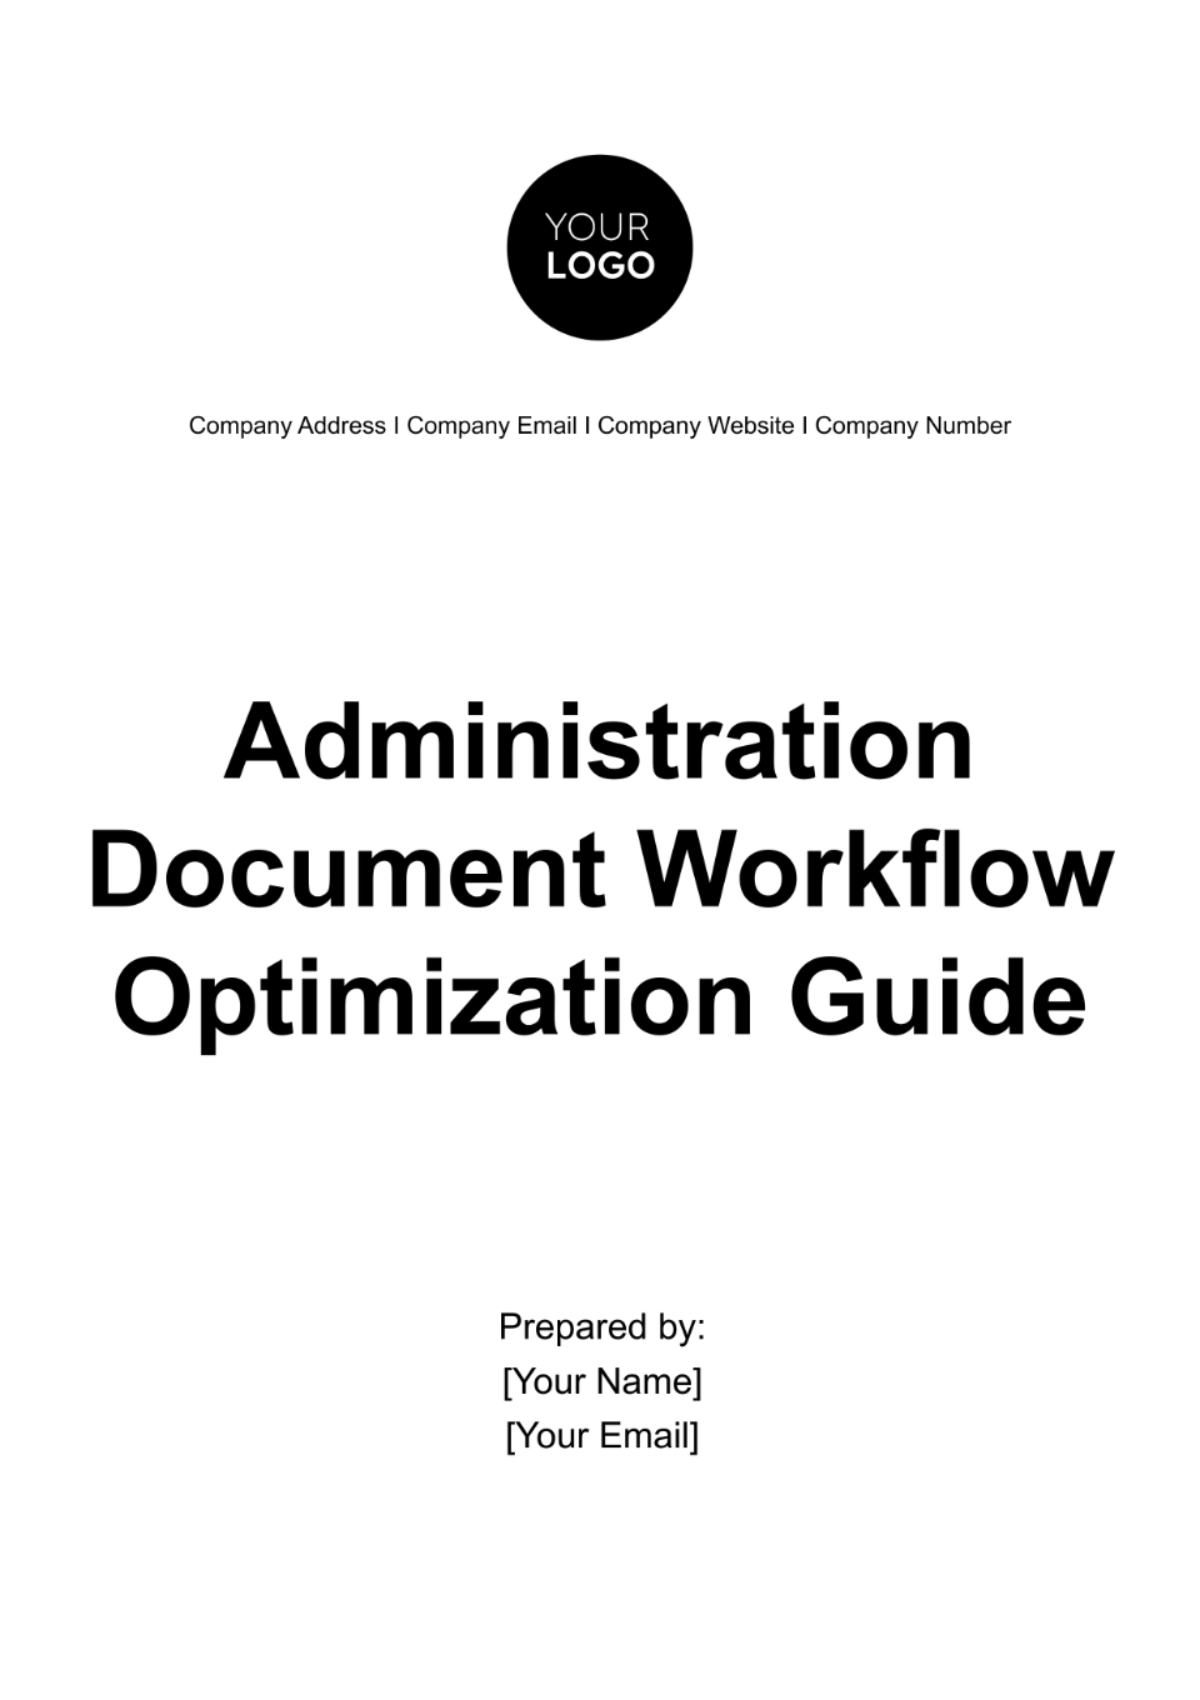 Administration Document Workflow Optimization Guide Template